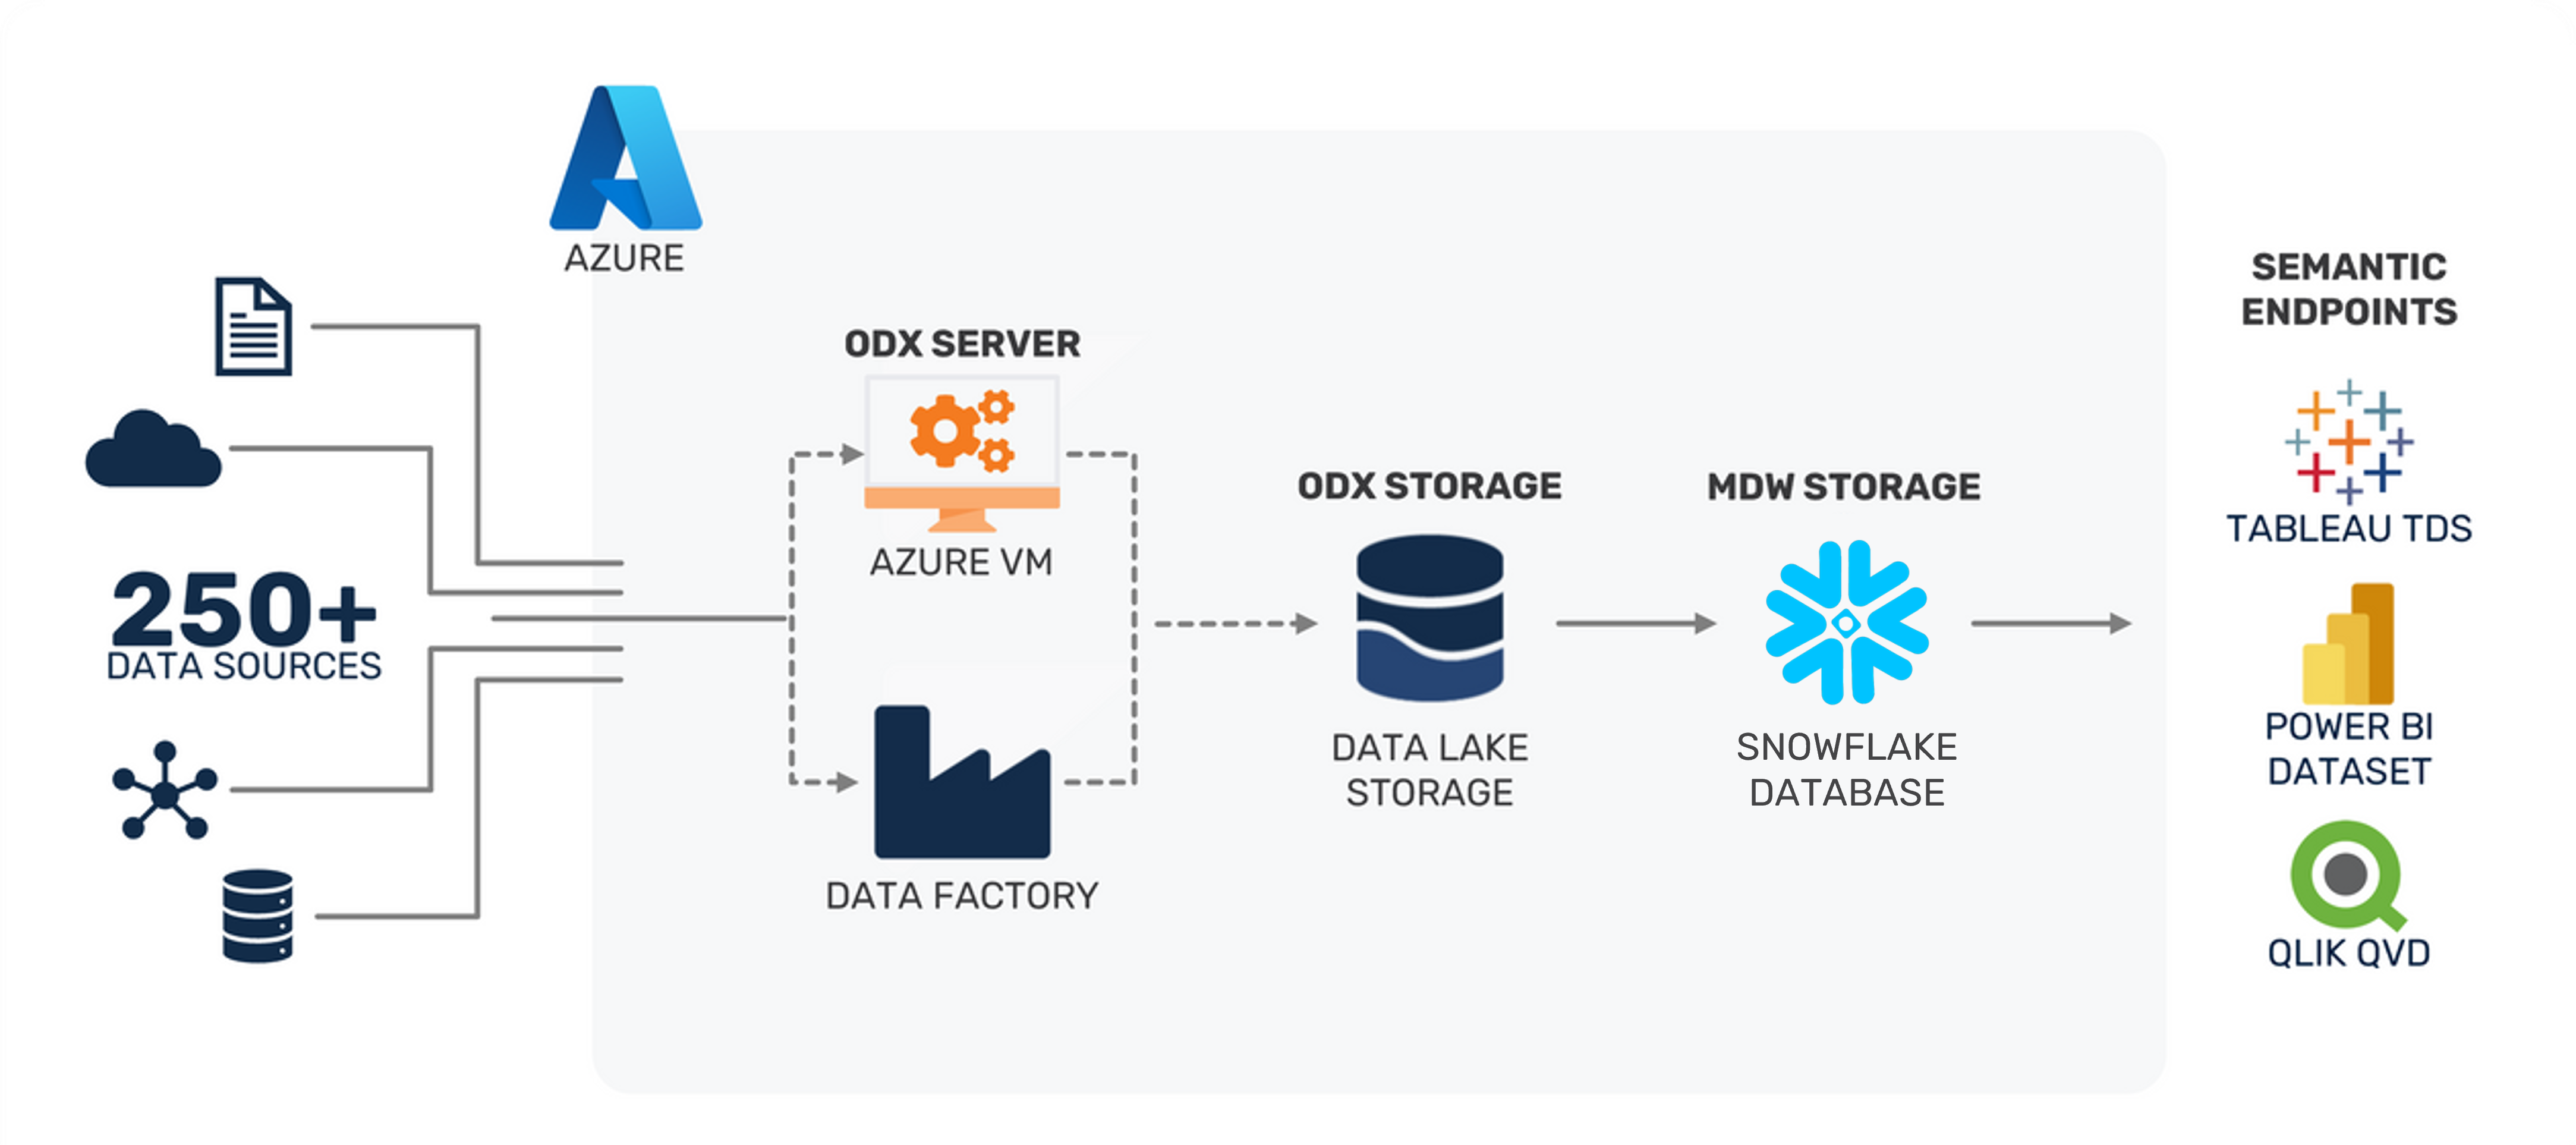 Snowflake Database Reference Architecture